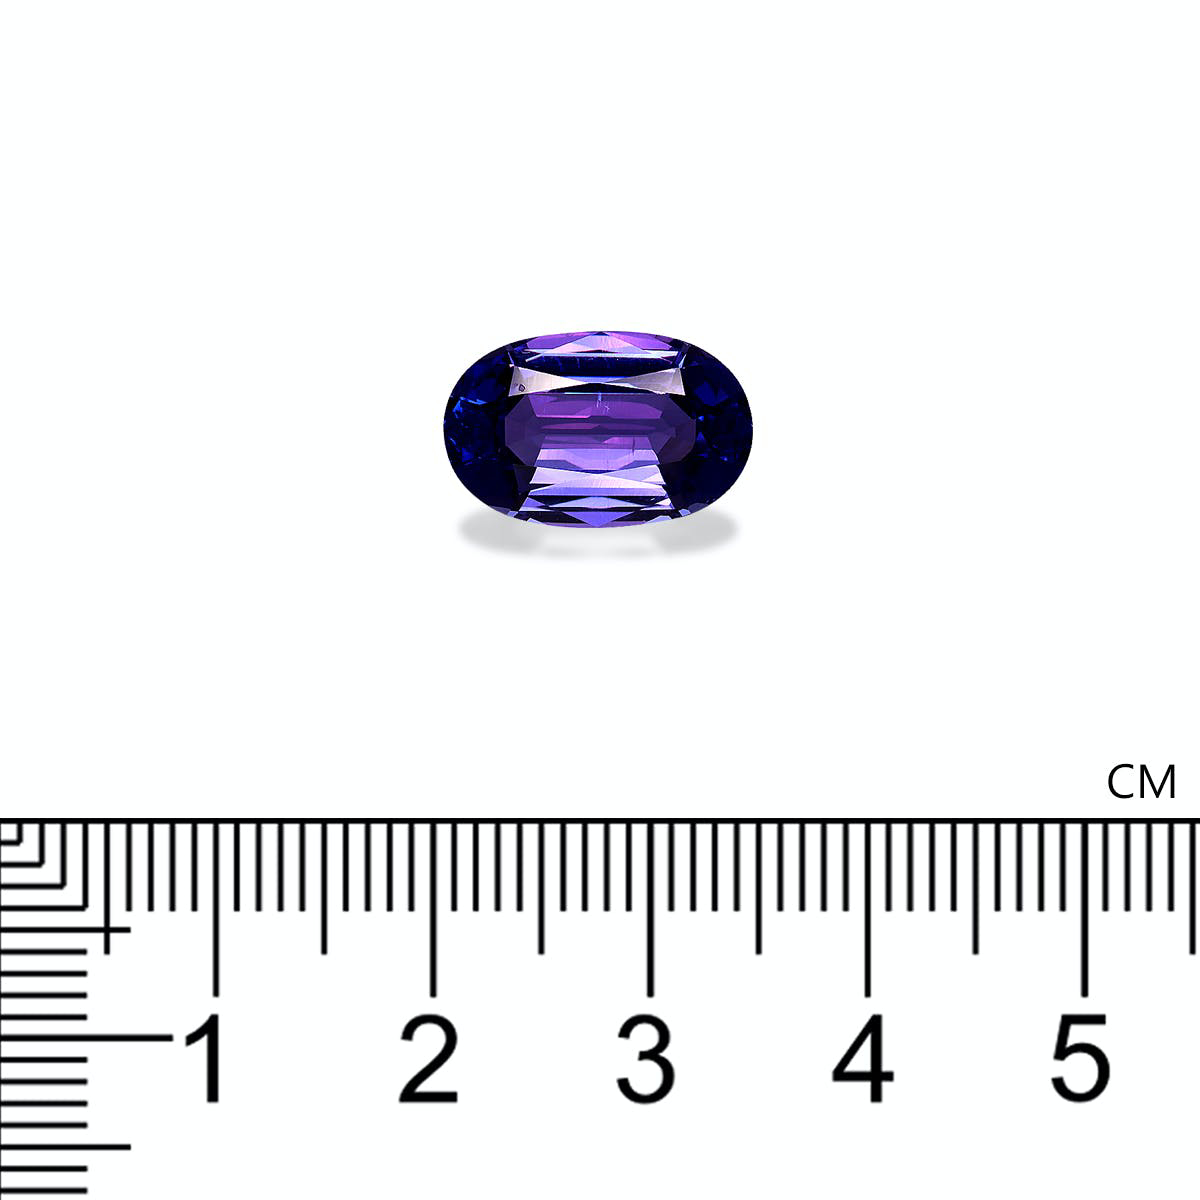 Picture of AAA+ Violet Blue Tanzanite 5.33ct (TN0296)